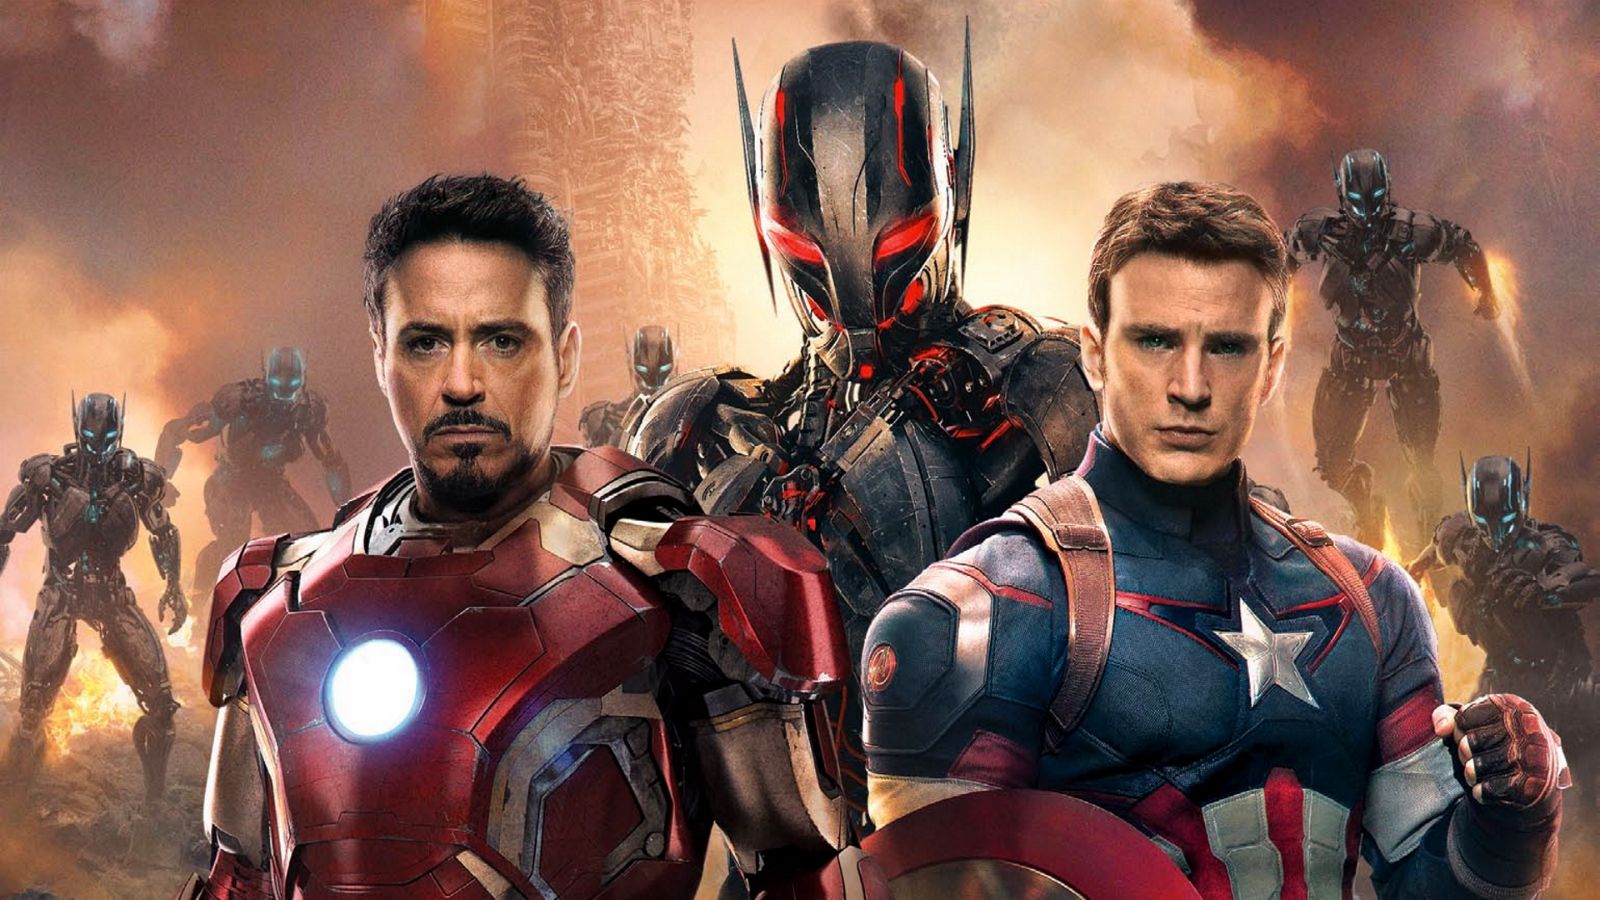 Avengers: Age of Ultron holds strong on Monday